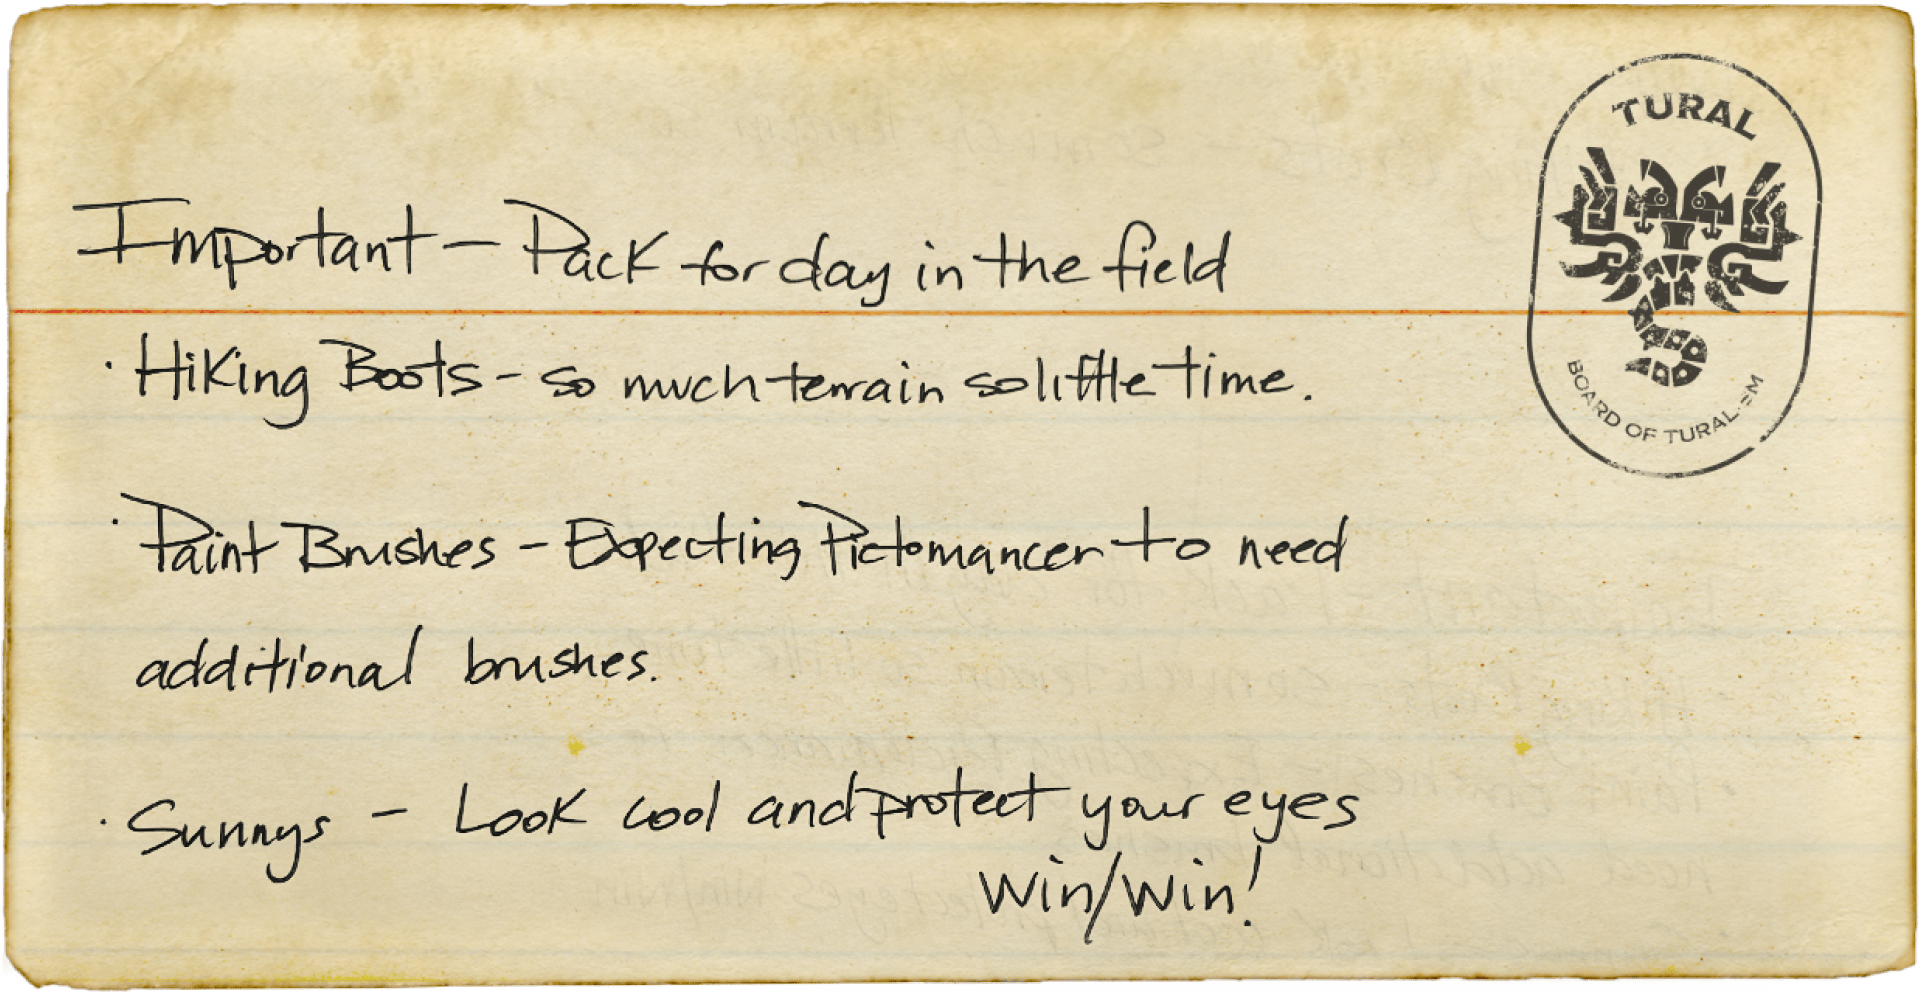 You found a note! It says: Important - pack for day in the field: Hiking Boots - so much terrain so little time. Paint Brushes - Expecting Pictomancer to need additional brushes. Sunnys - Look cool and protect your eyes. Win/win!